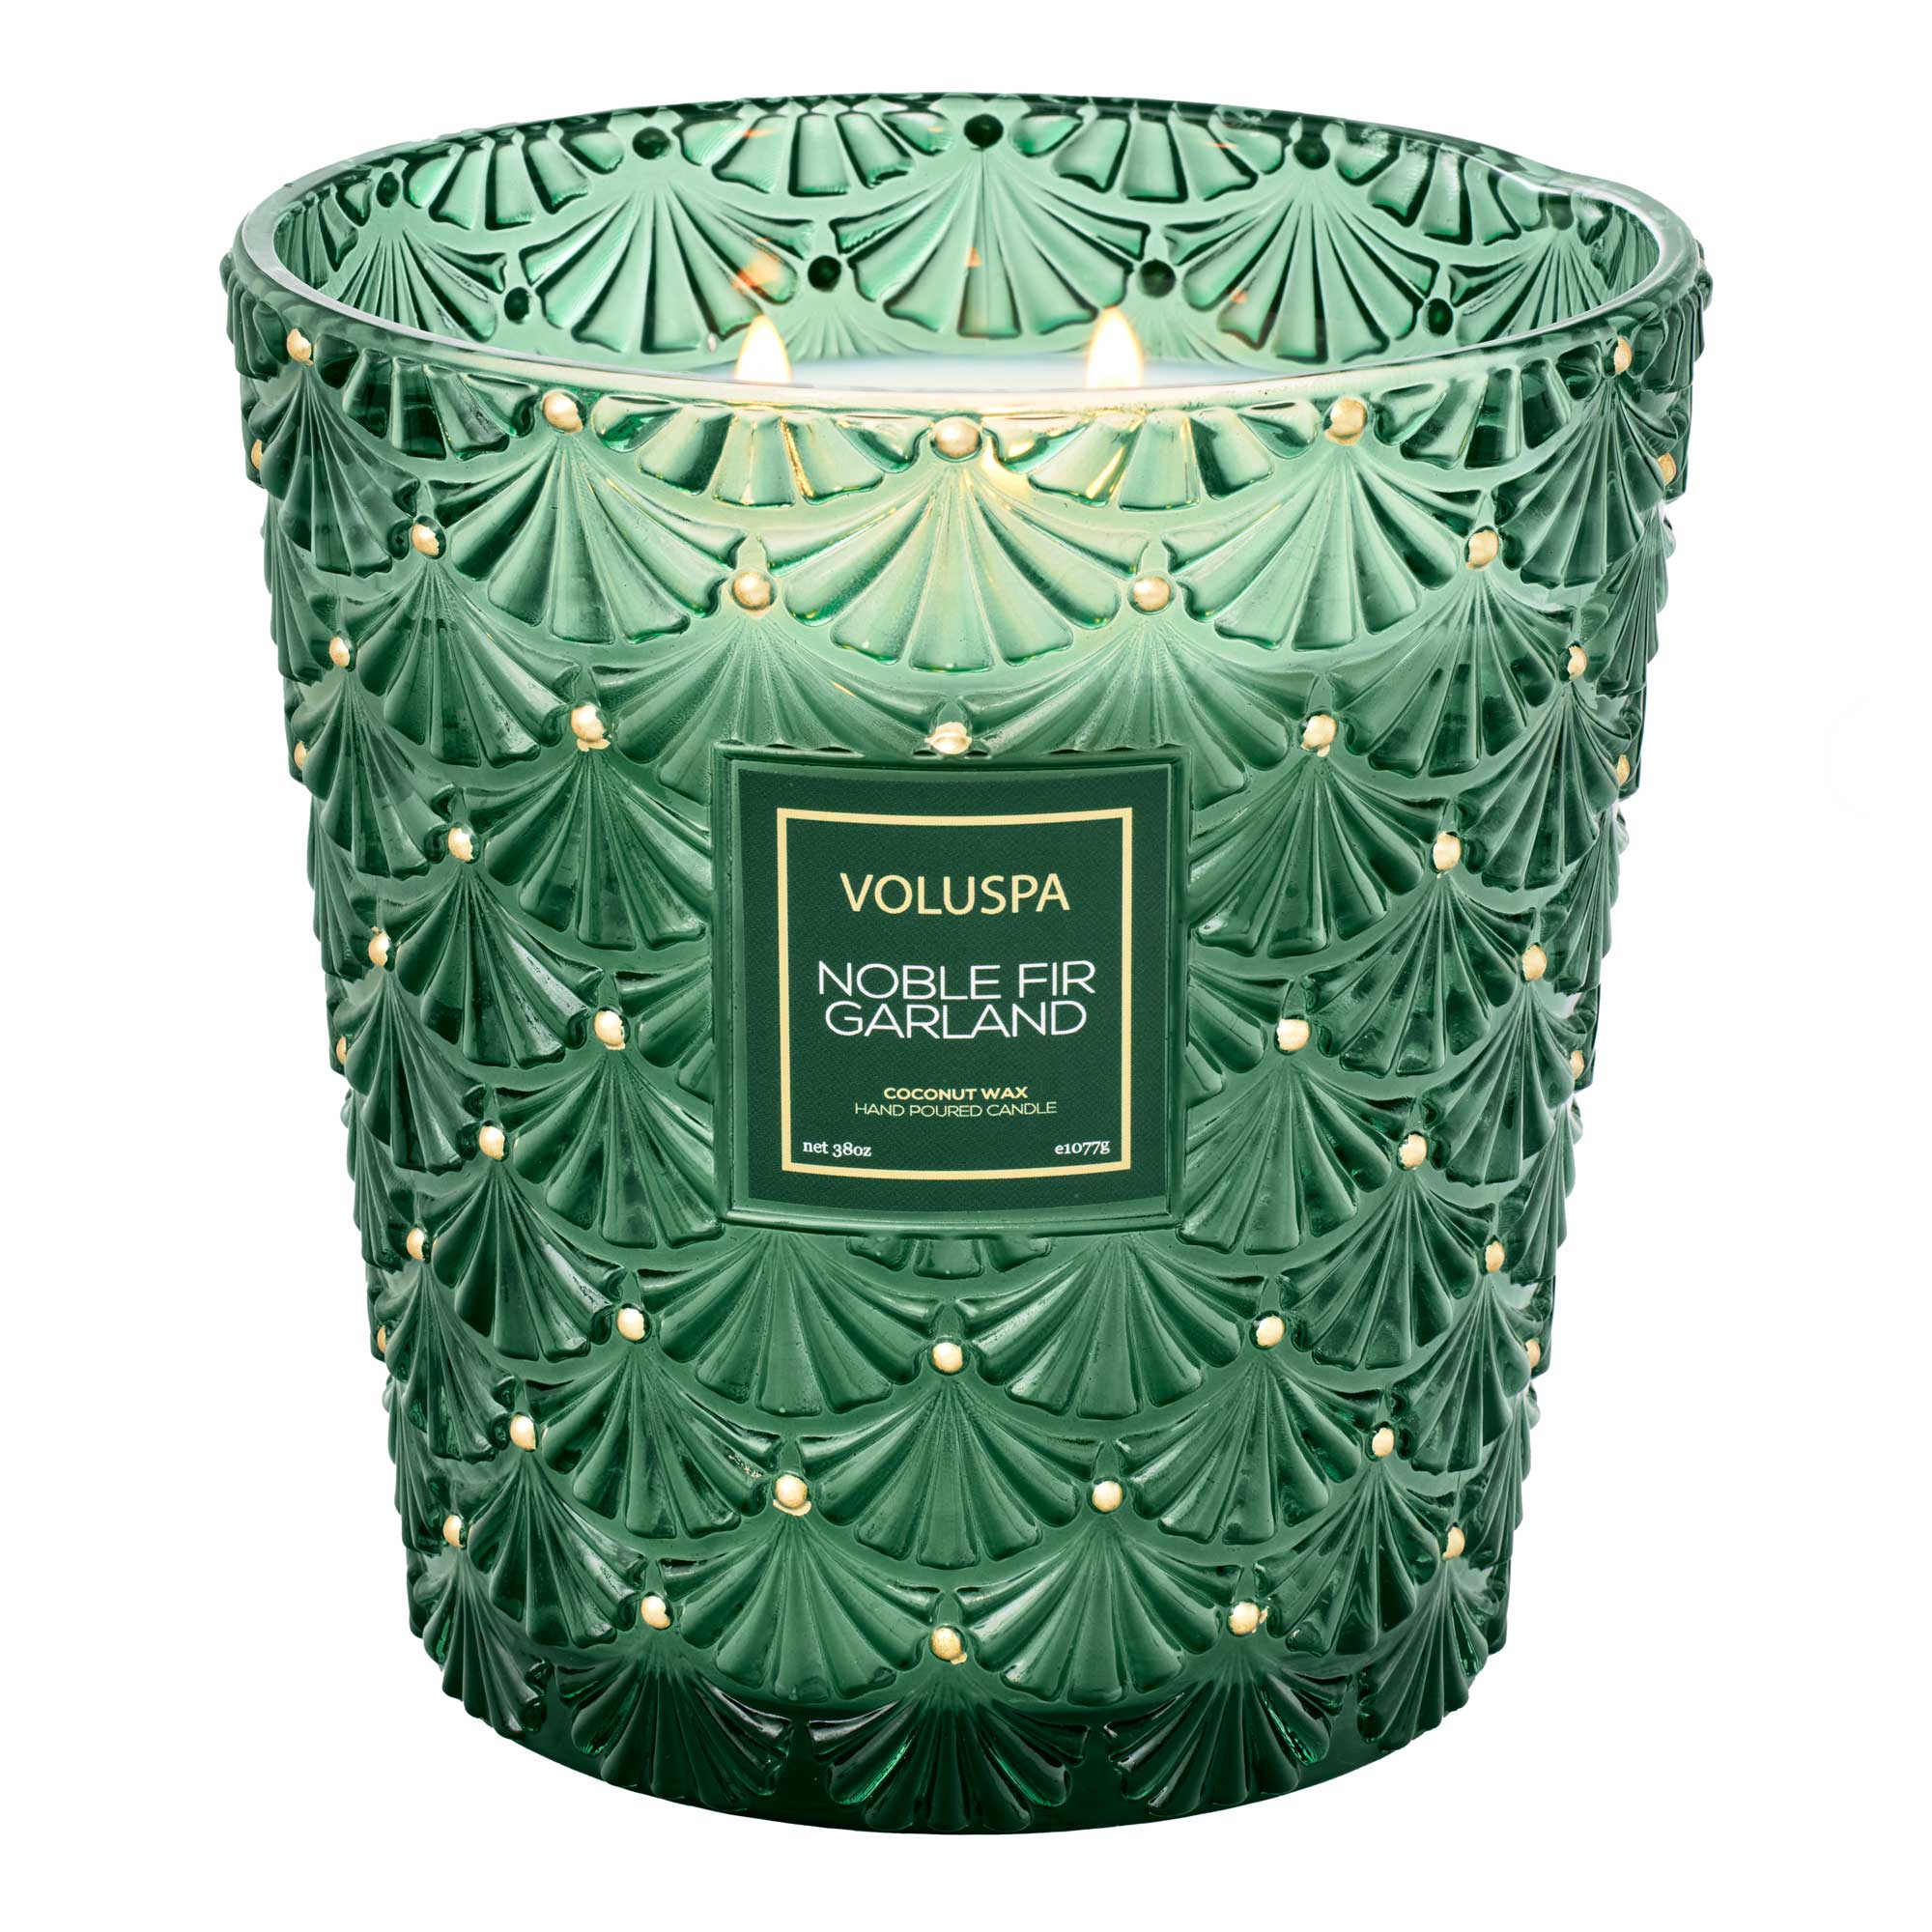 Noble Fir Garland 3 Wick Hearth Candle